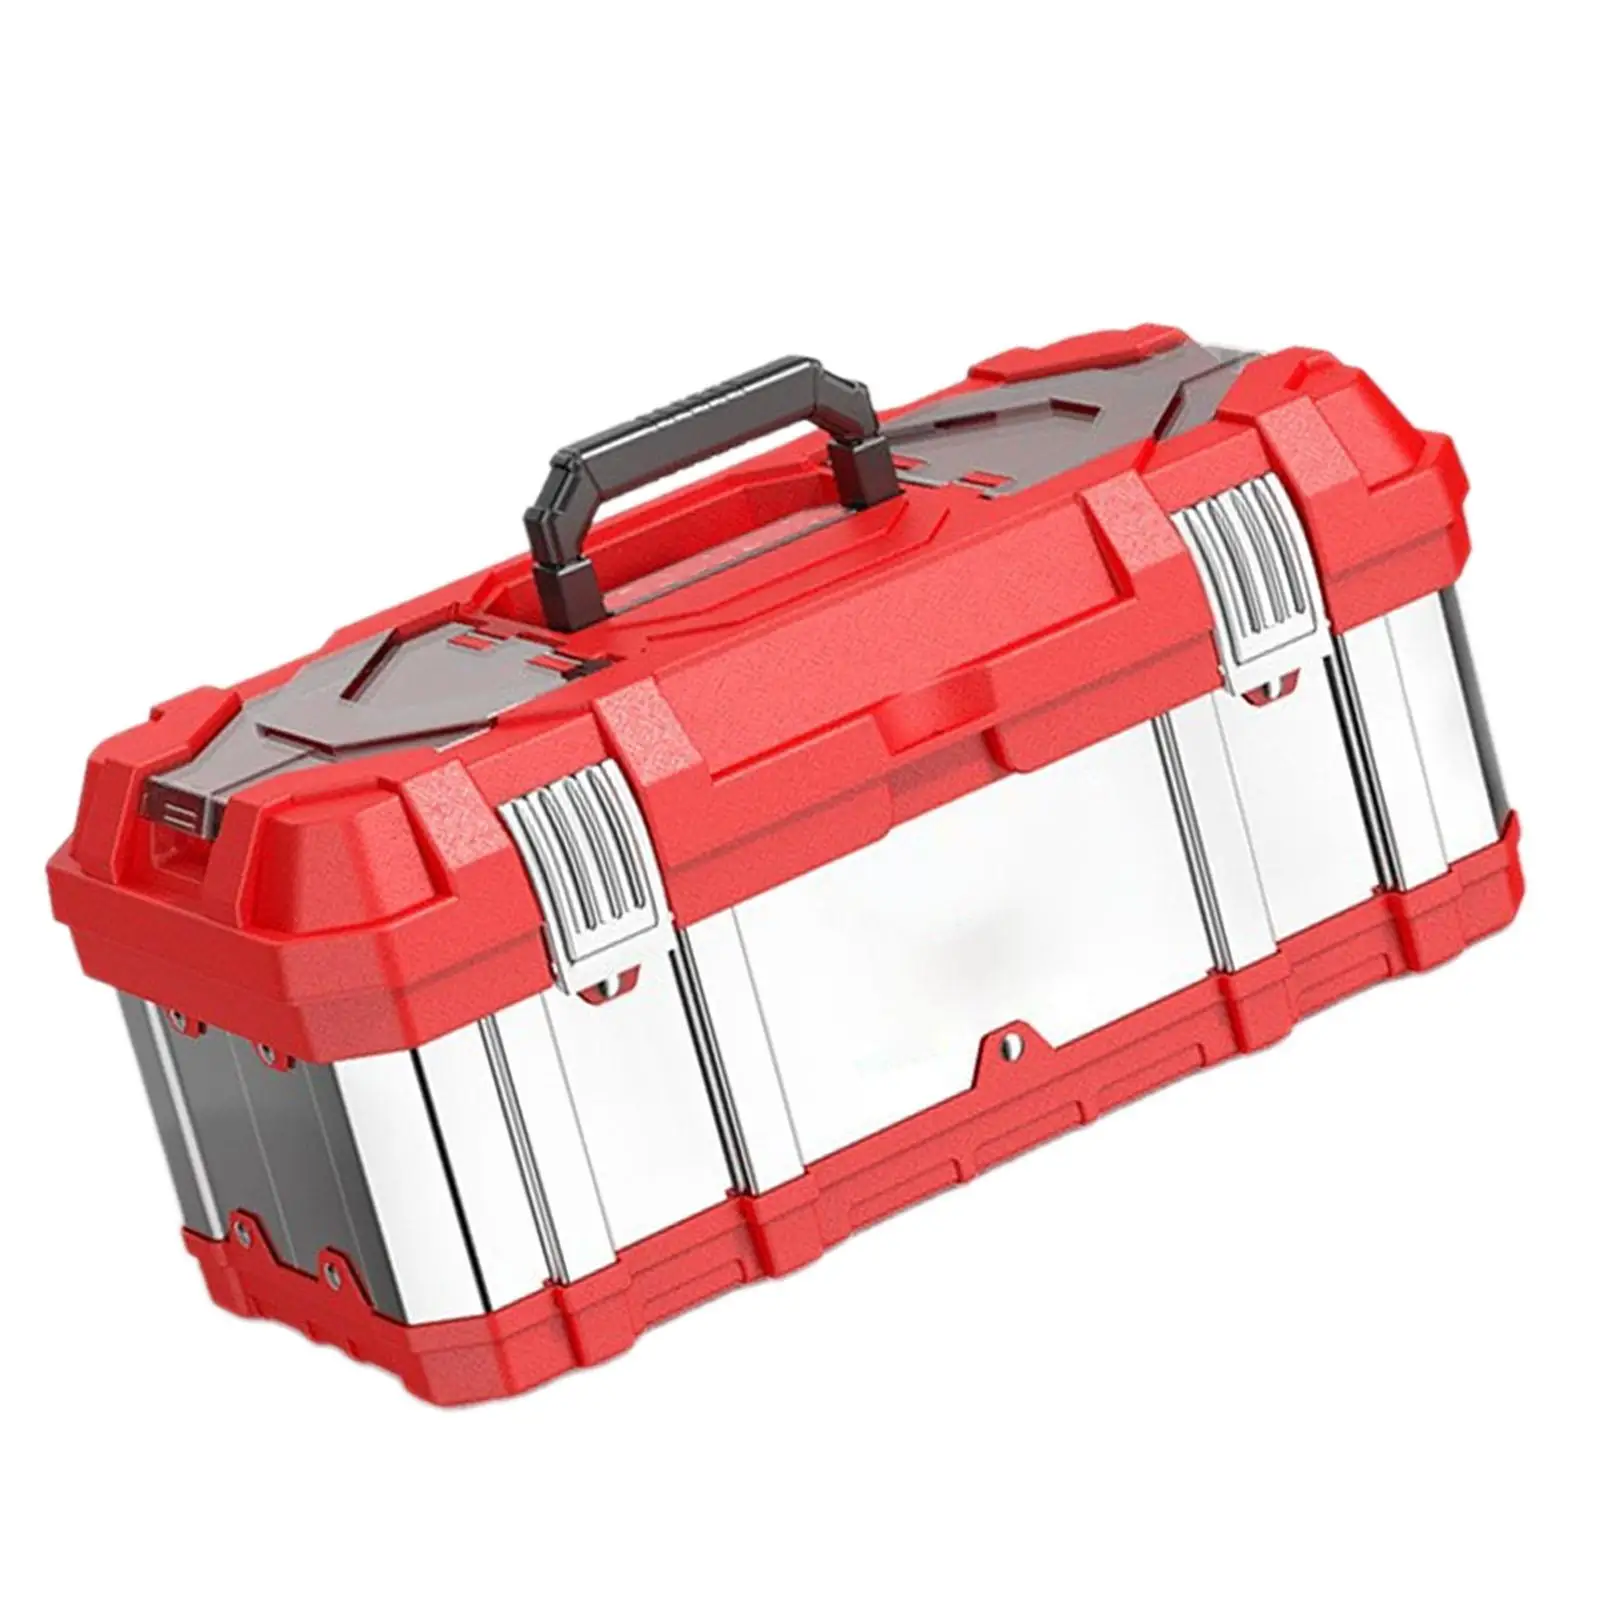 Stainless Steel Tool Box Tool Storage Case for Plumber Home Car Trunks